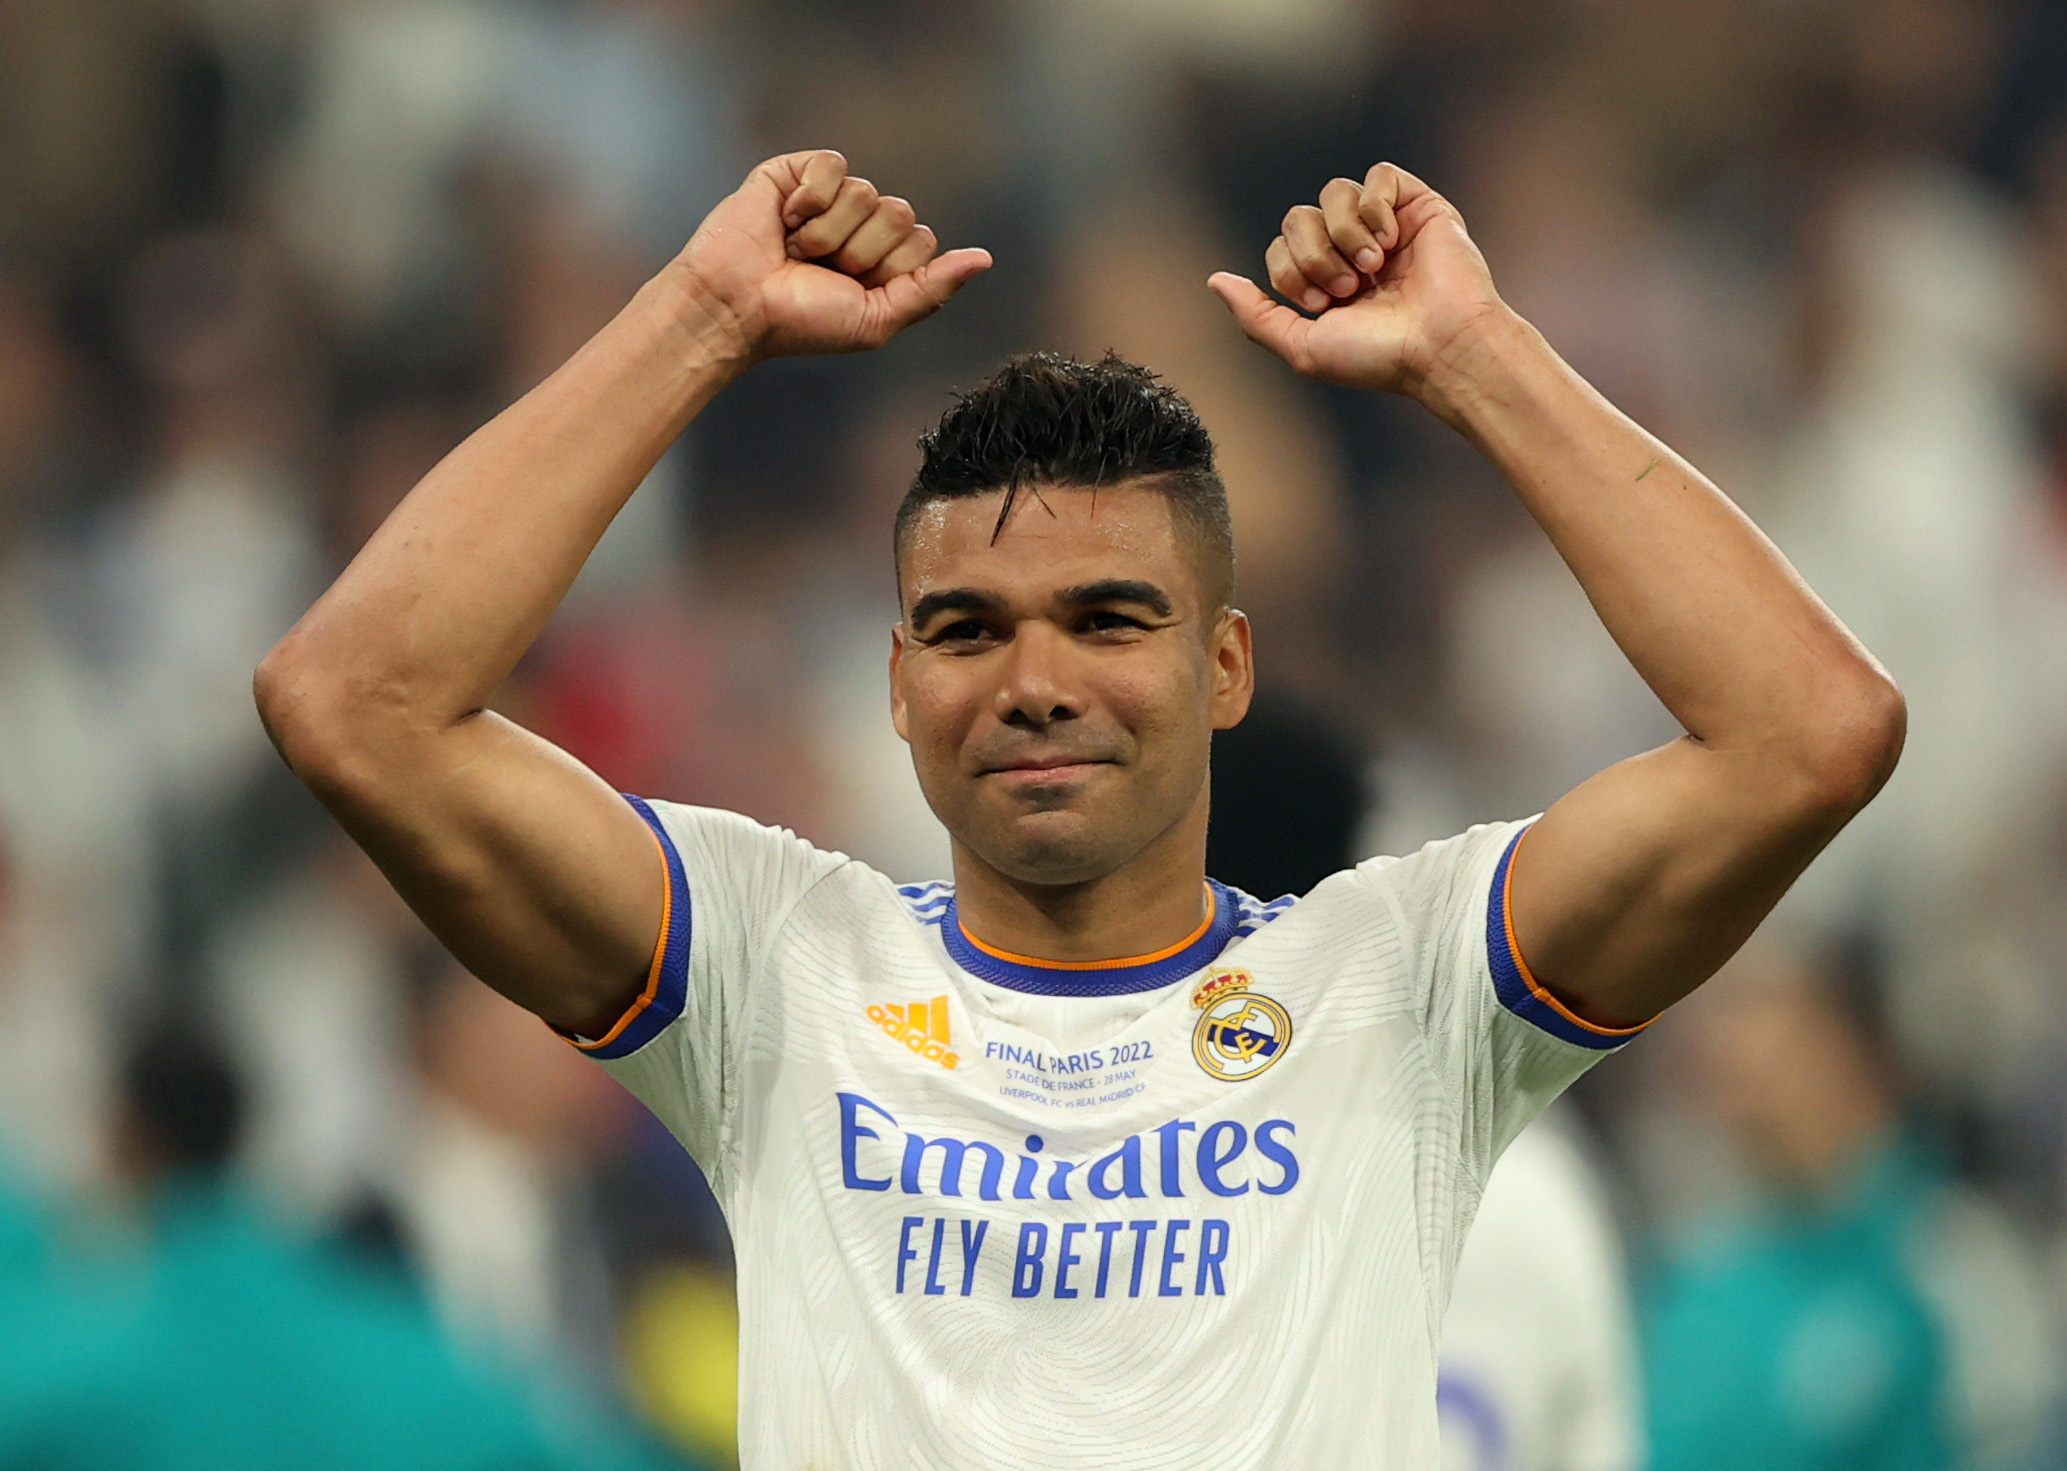 Manchester United reach deal to sign Casemiro from Real Madrid | Reuters